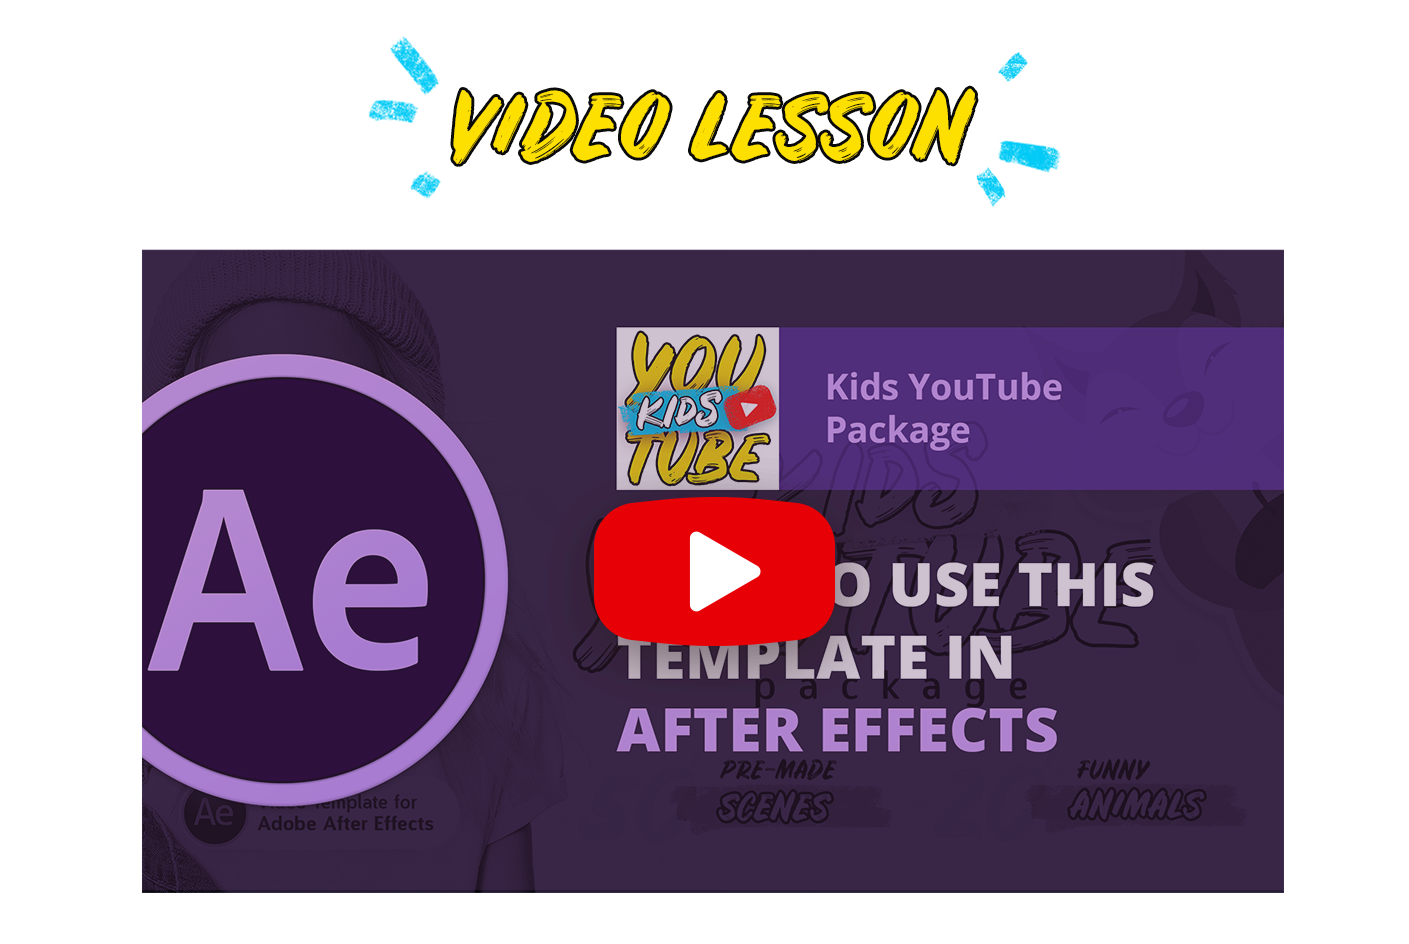  Kids Youtube Package | For Ae 